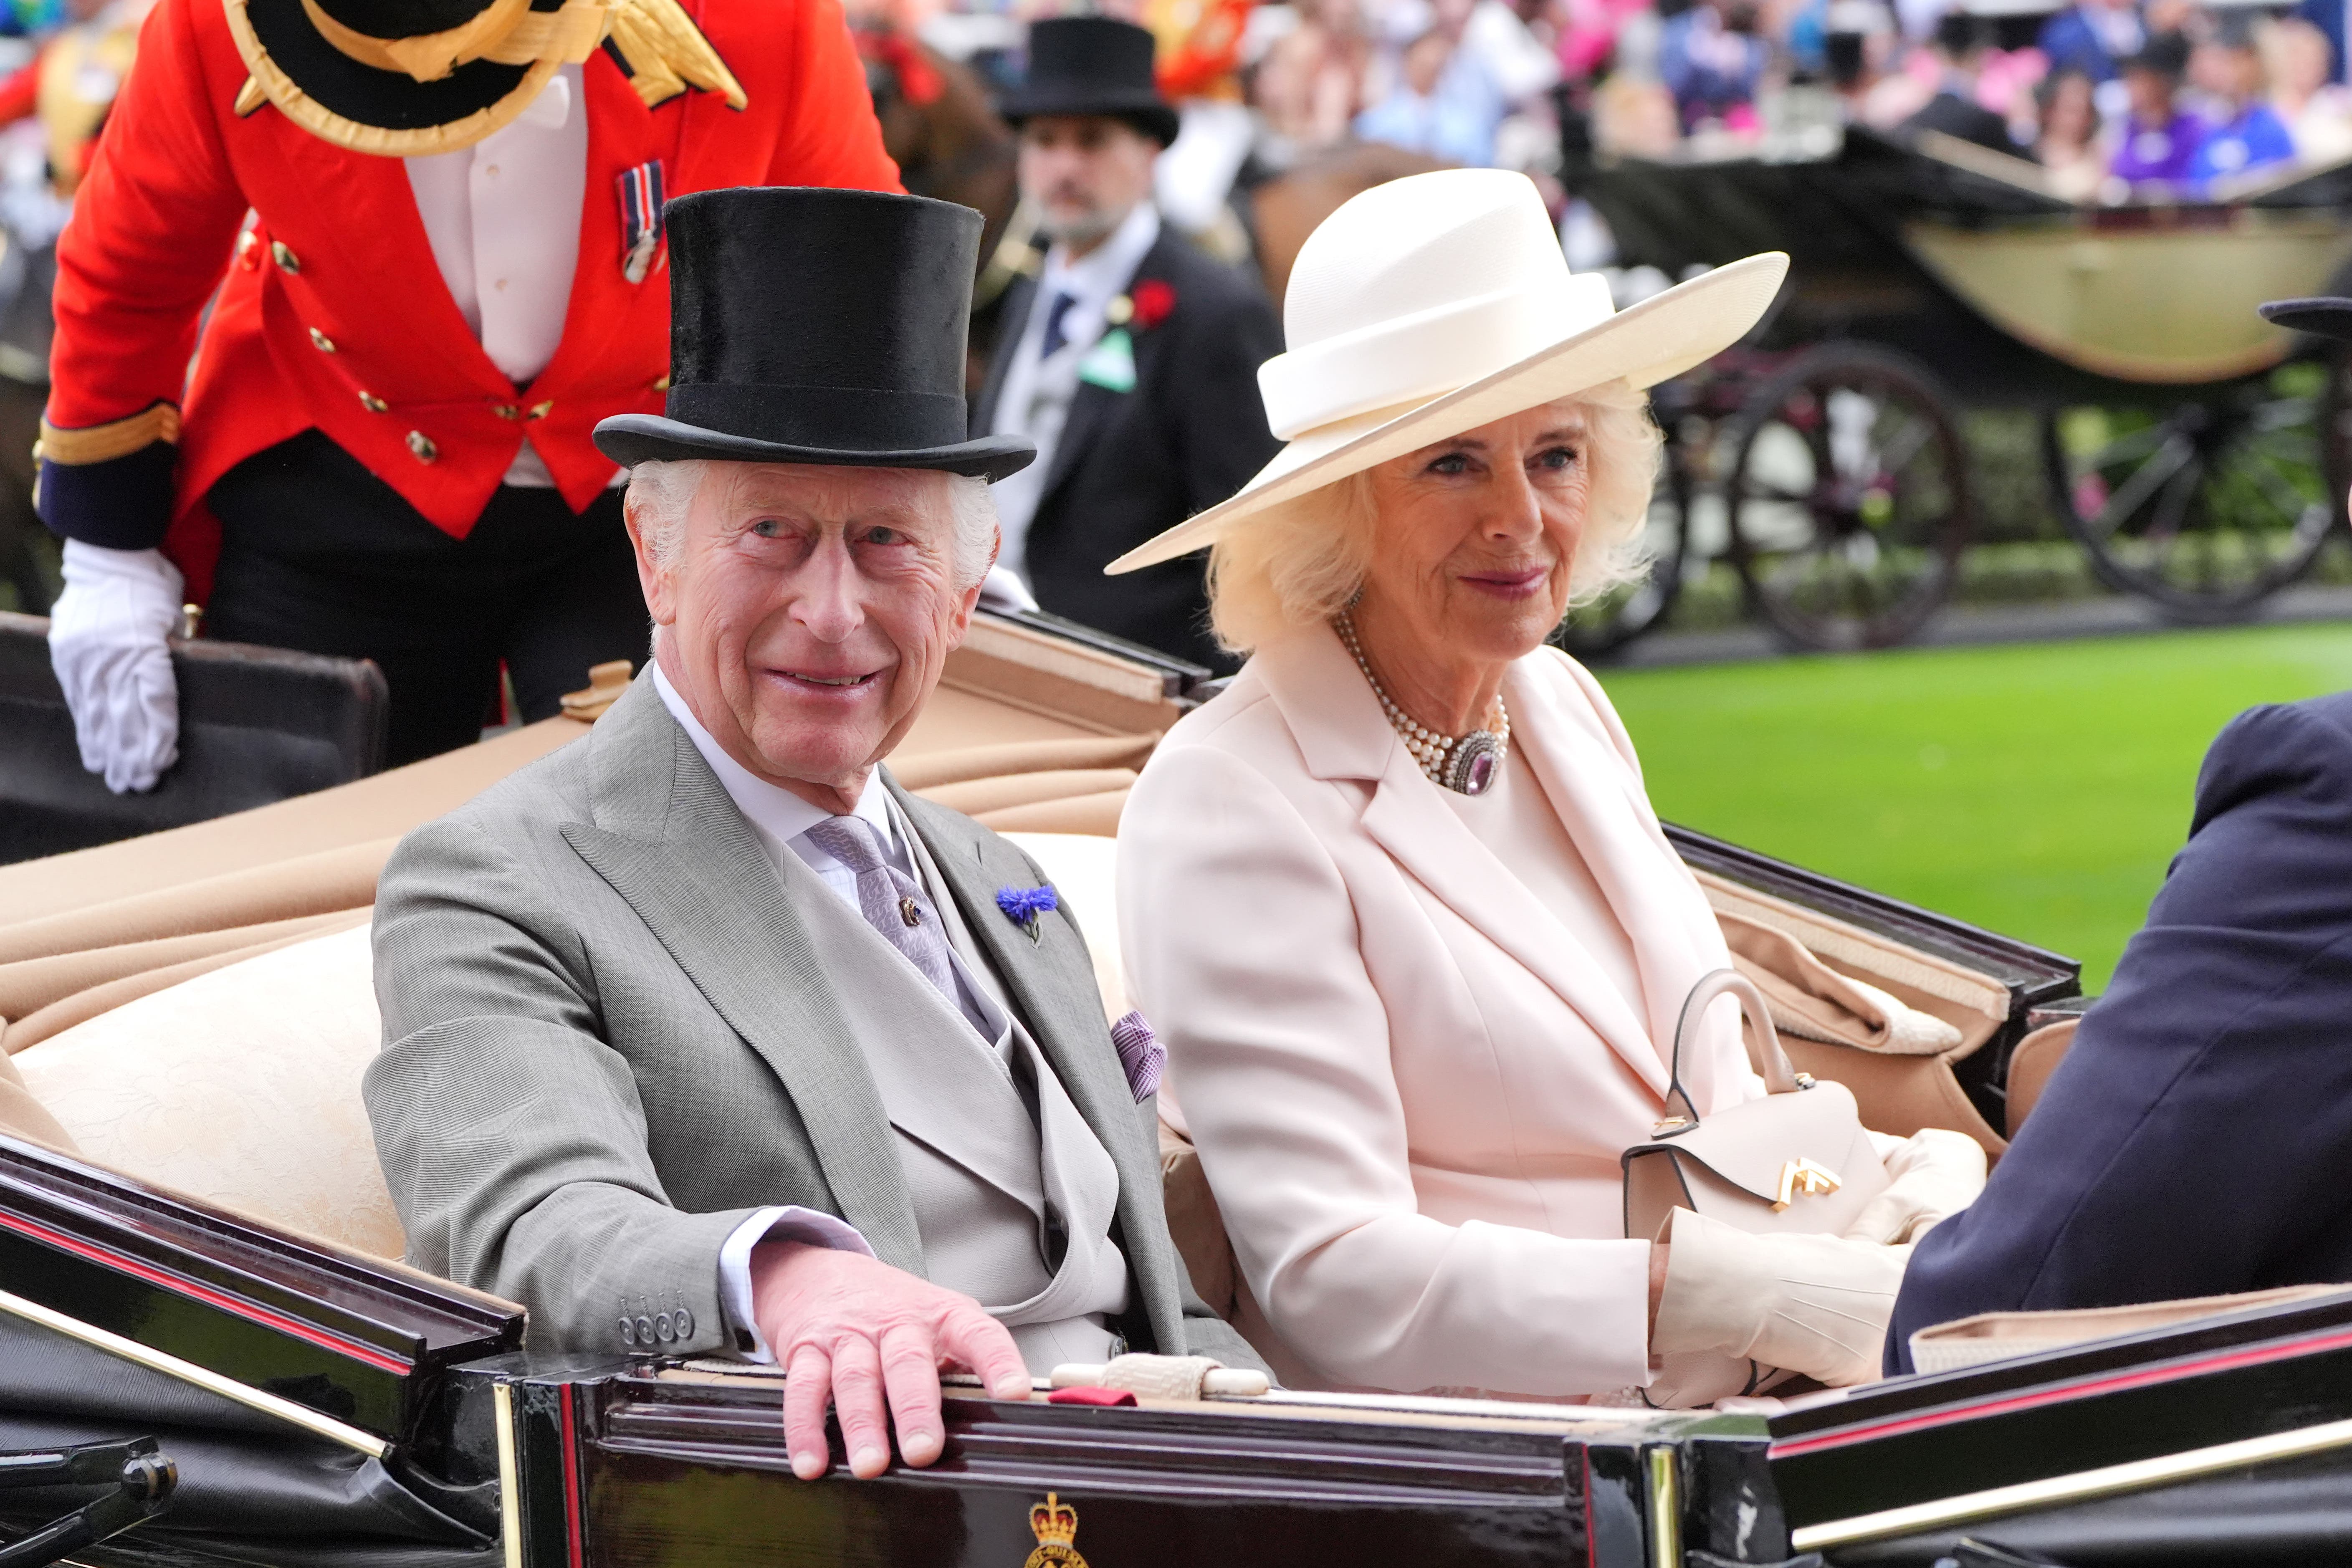 The King and Queen arrive for the fifth day of Royal Ascot (Yui Mok/PA)